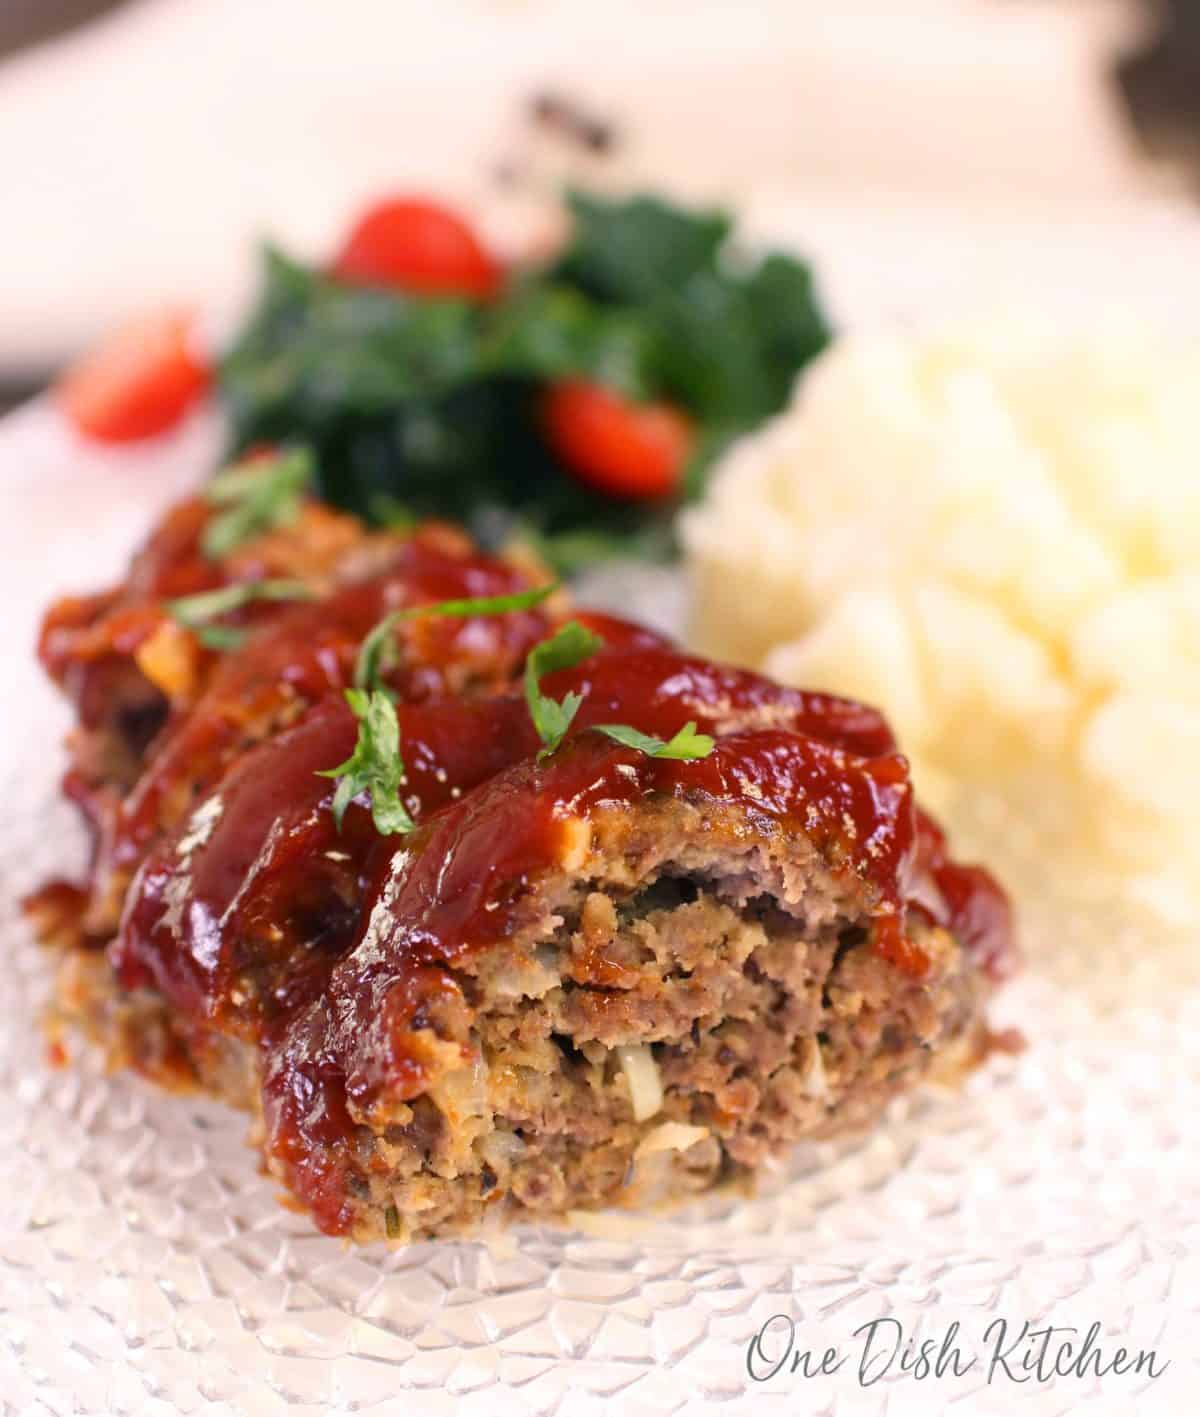 Sliced meatloaf on a plate with mashed potatoes and a small side salad in the background.